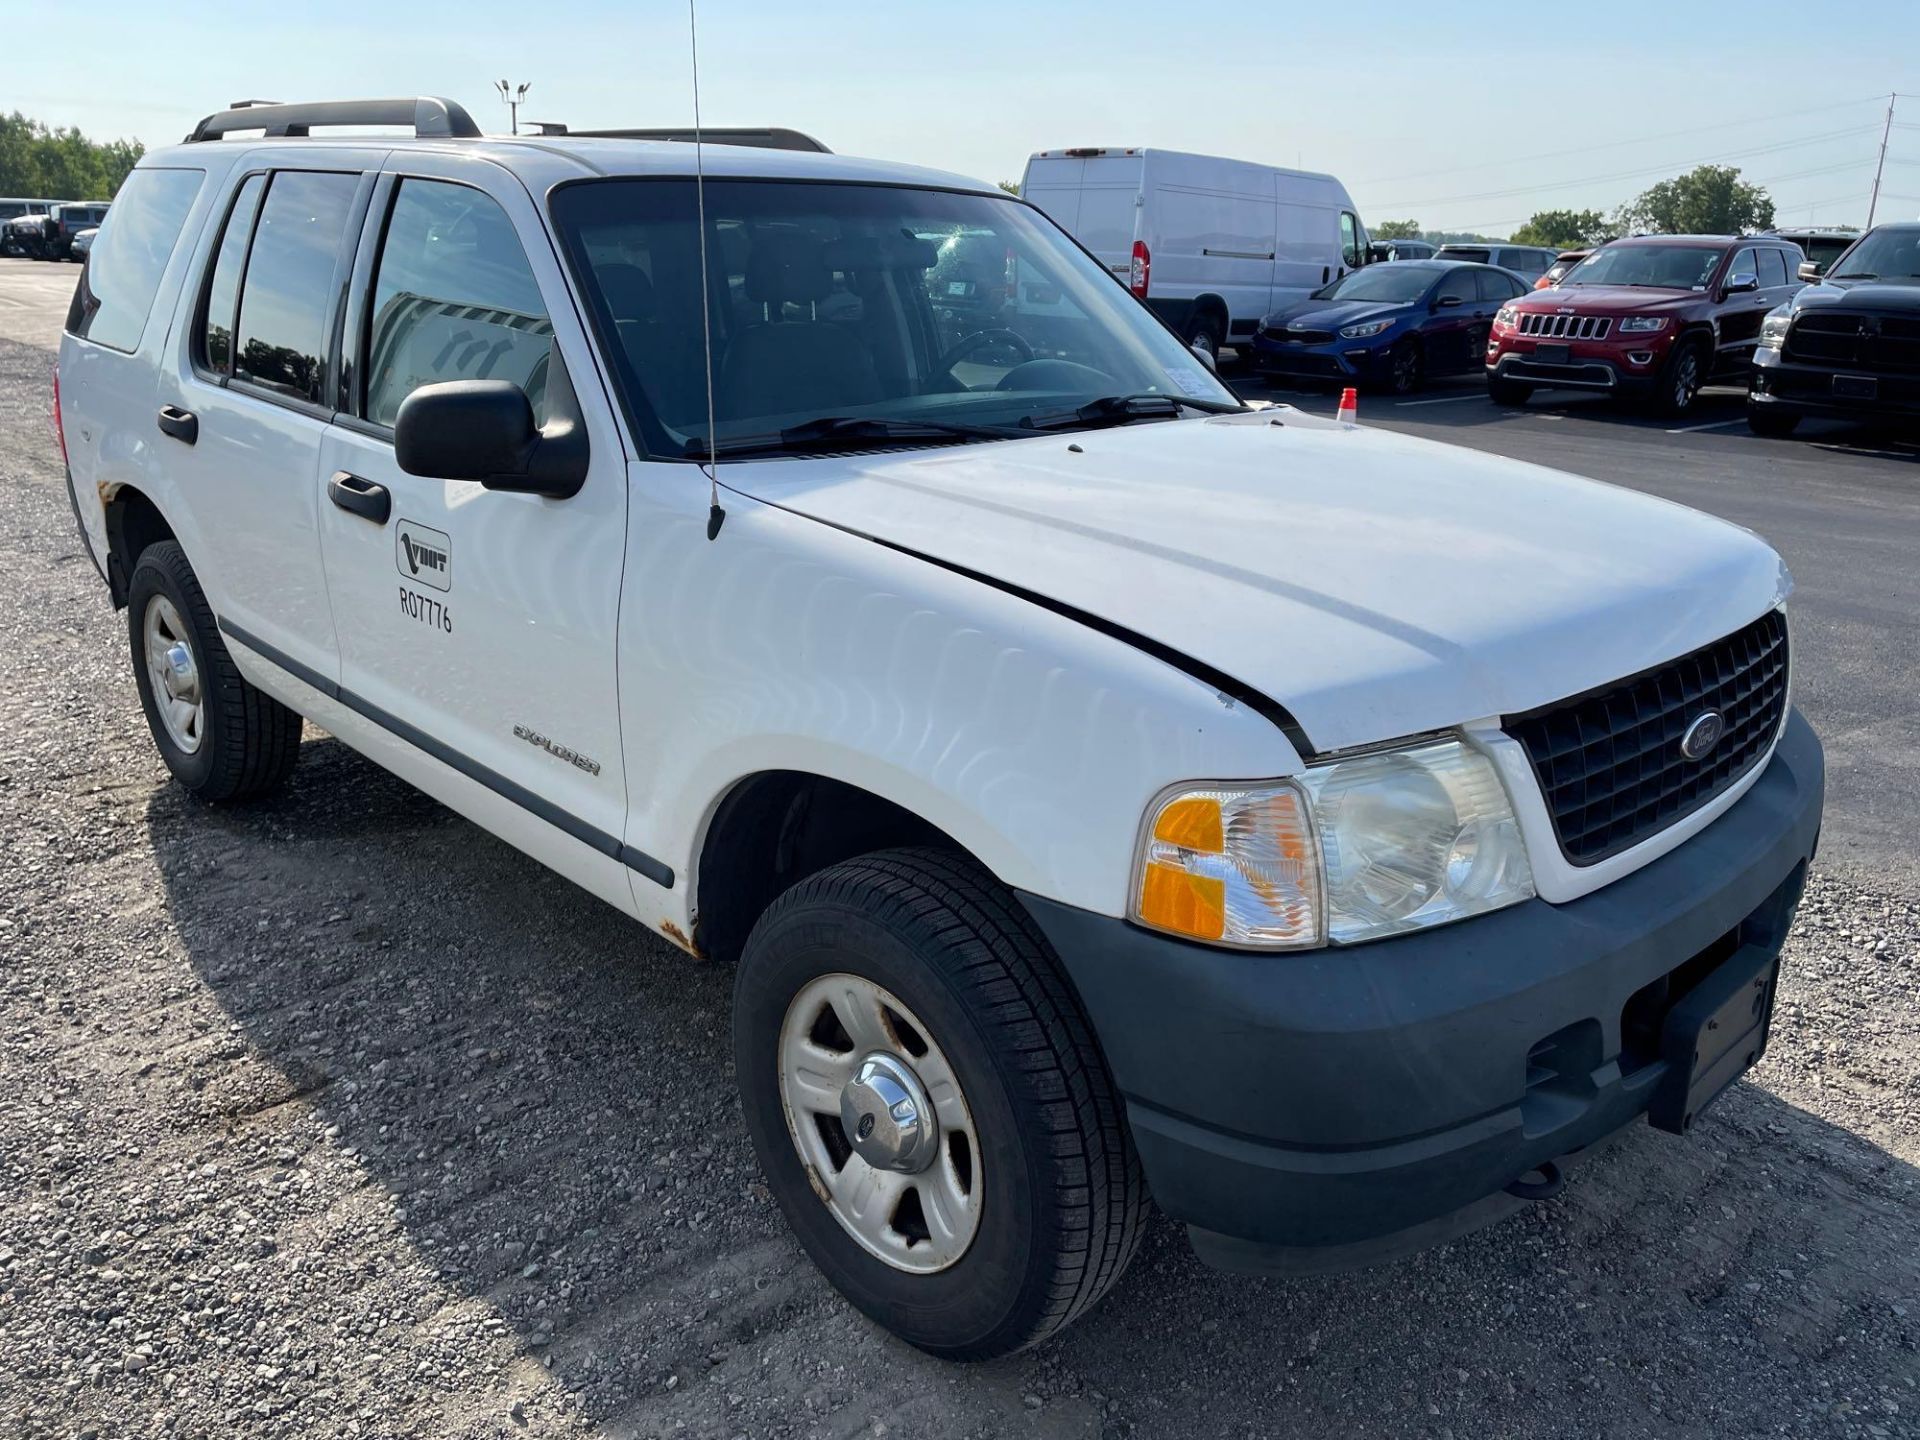 2005 Ford Explorer 4X4 - Image 4 of 22